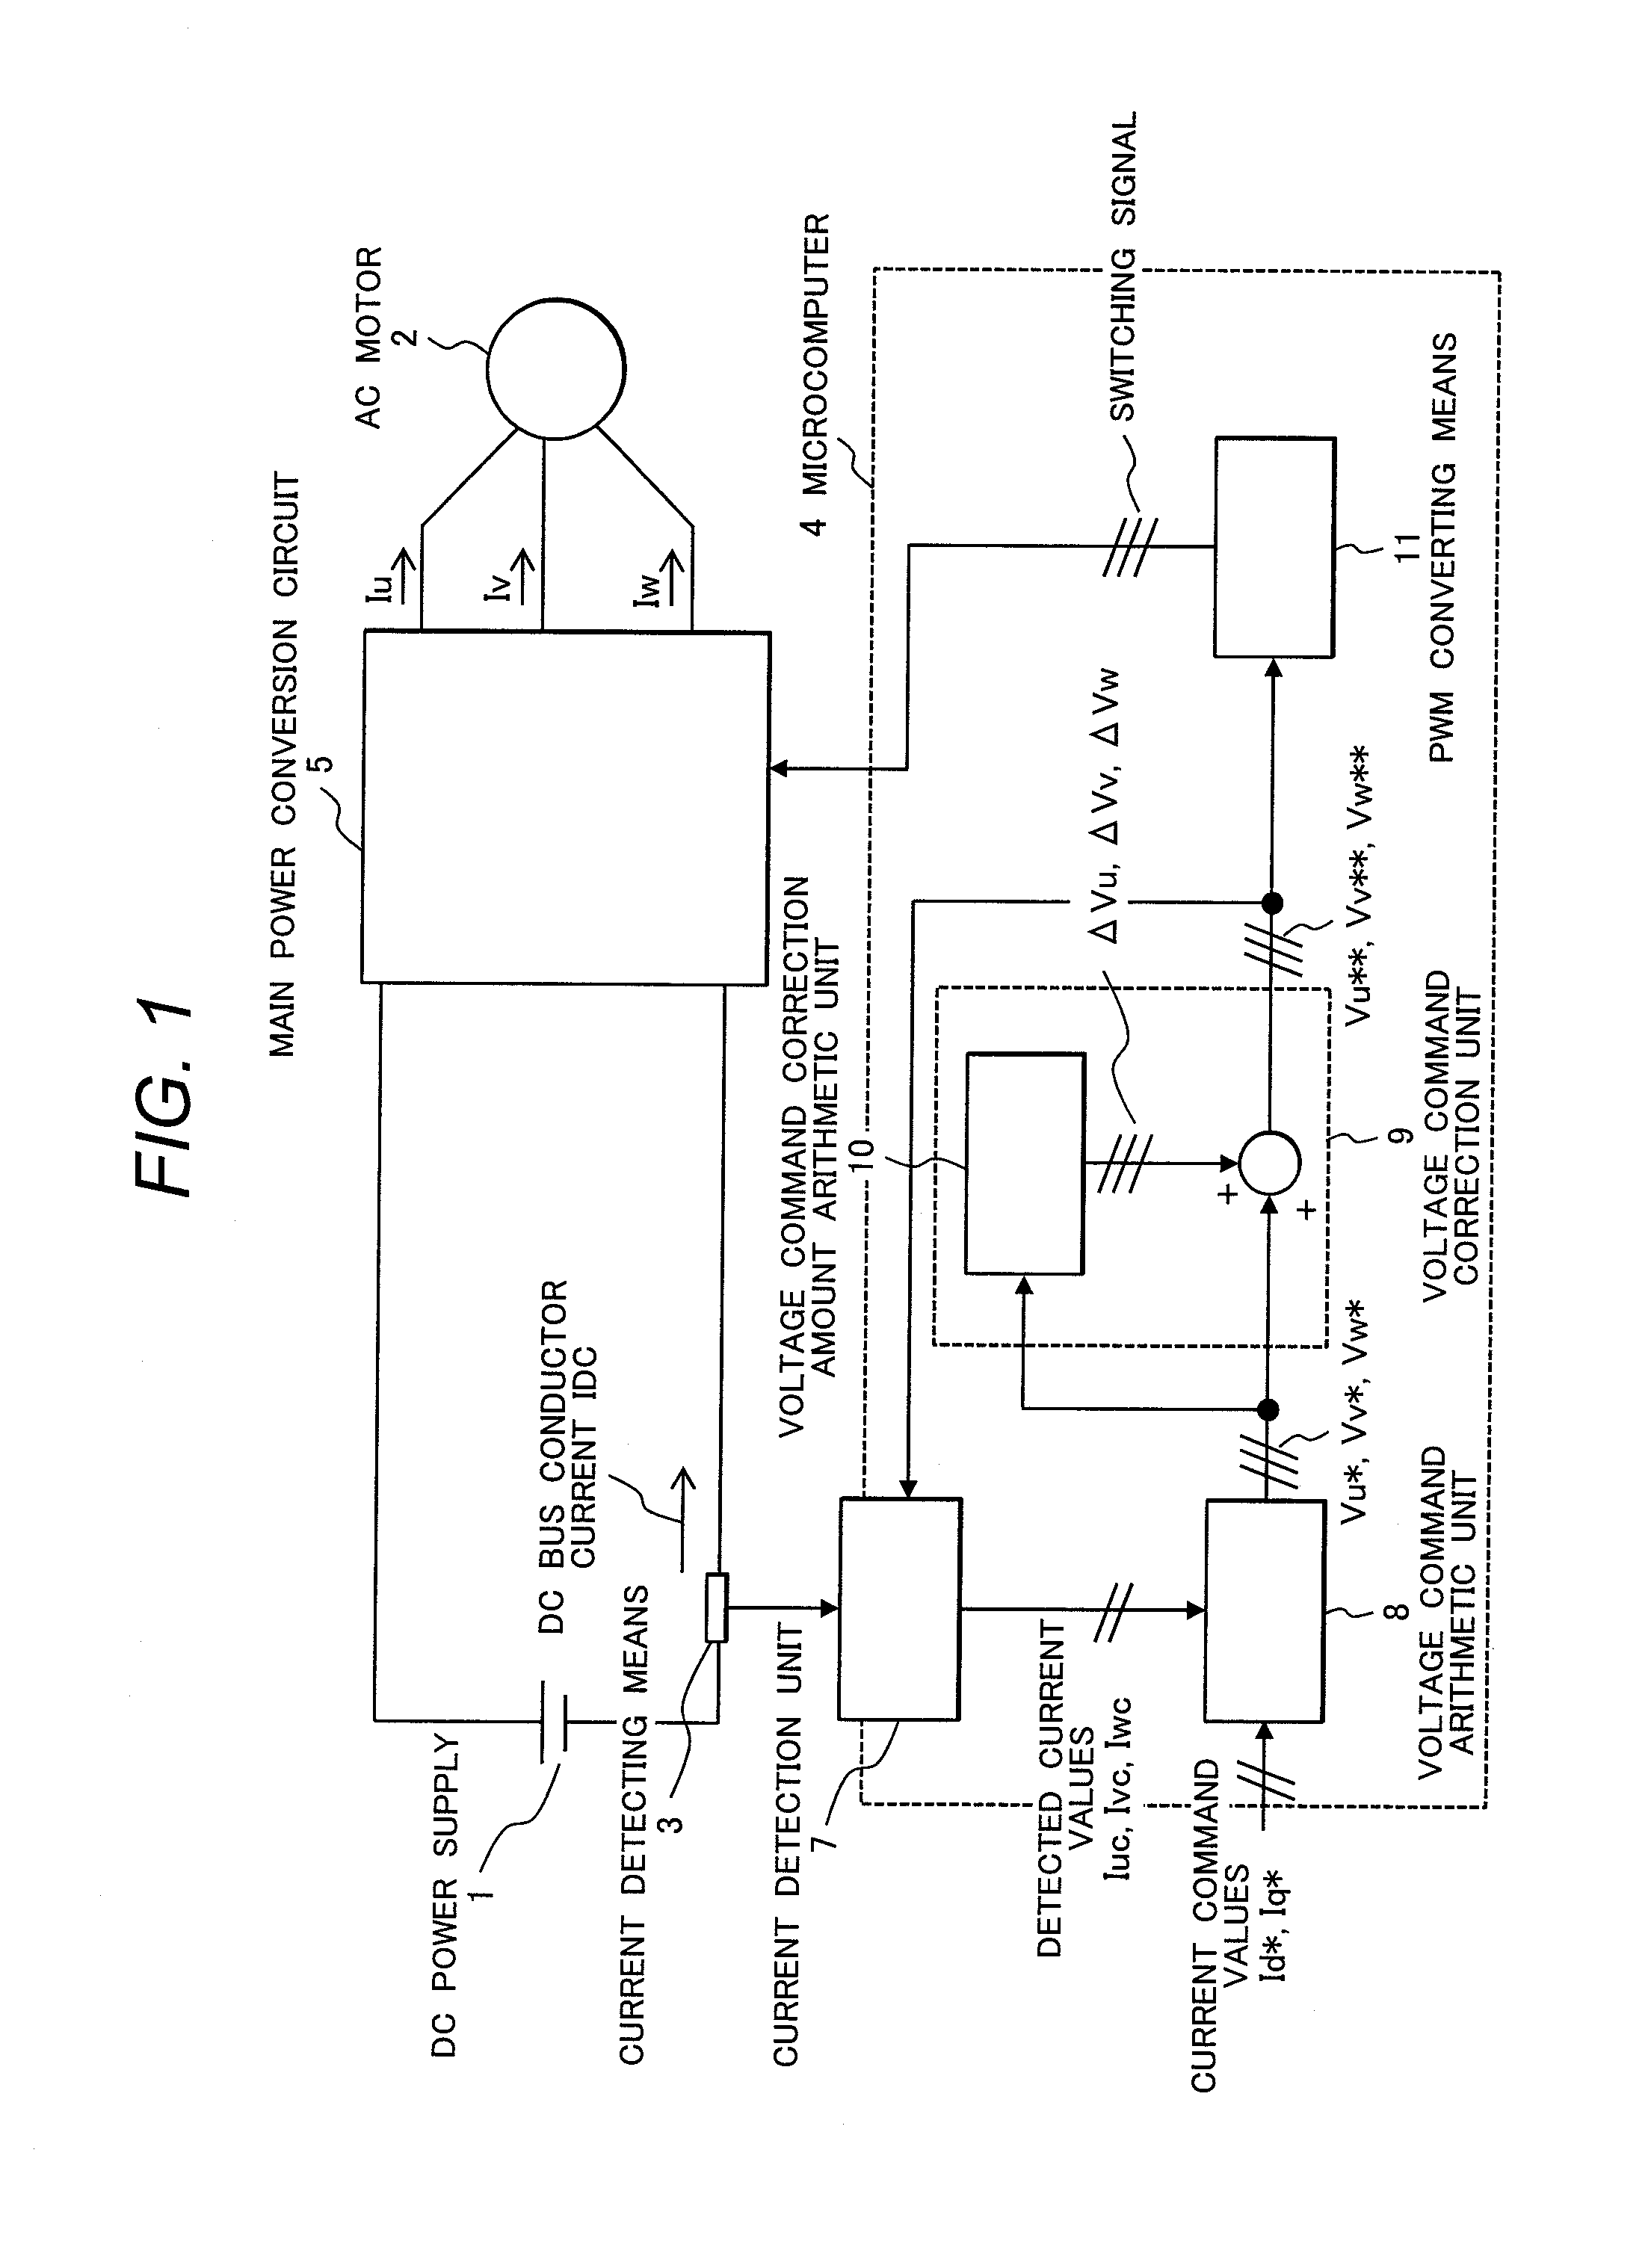 Power conversion device and method for controlling thereof